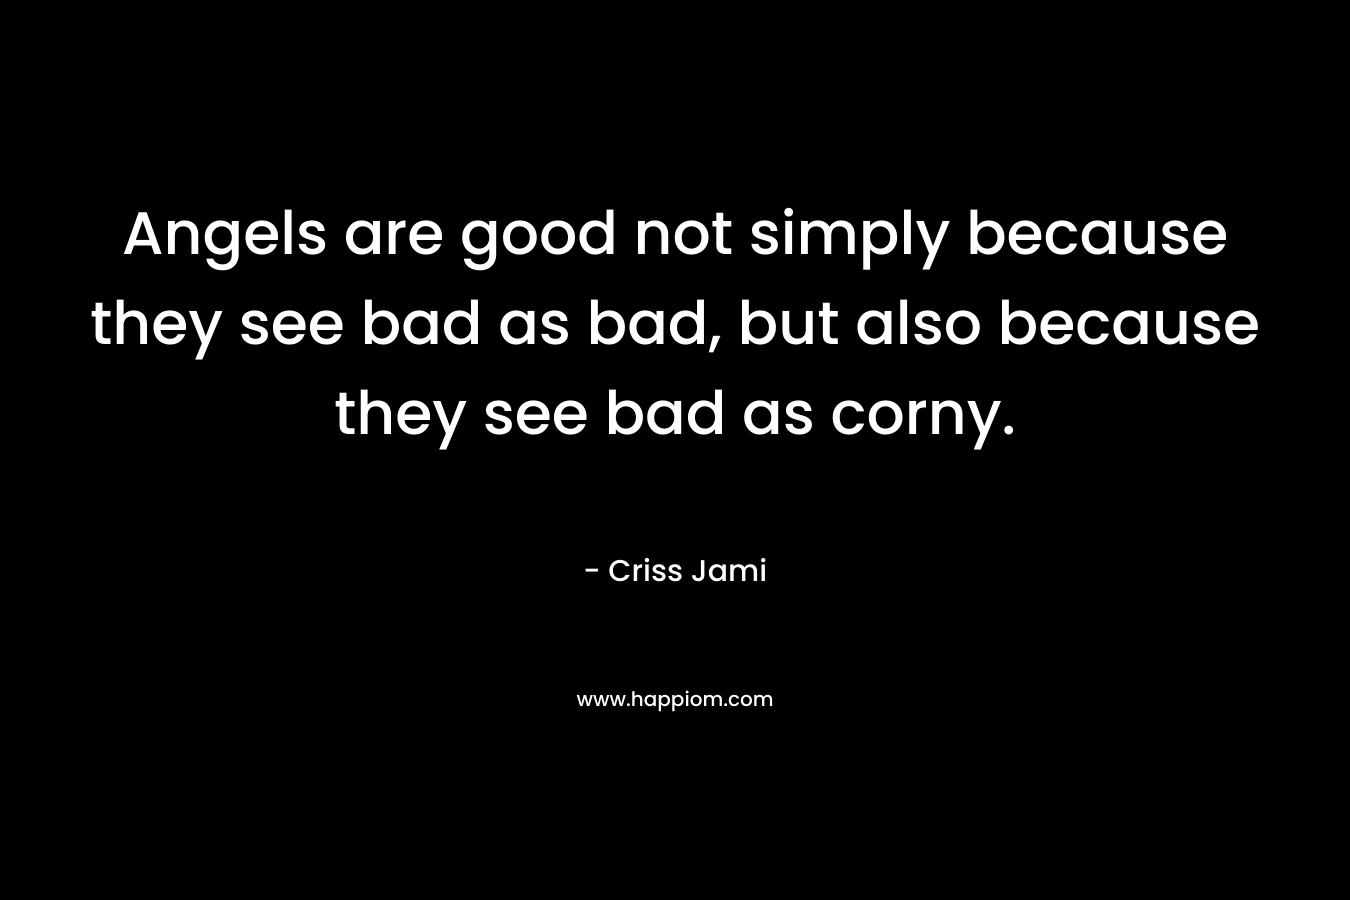 Angels are good not simply because they see bad as bad, but also because they see bad as corny.